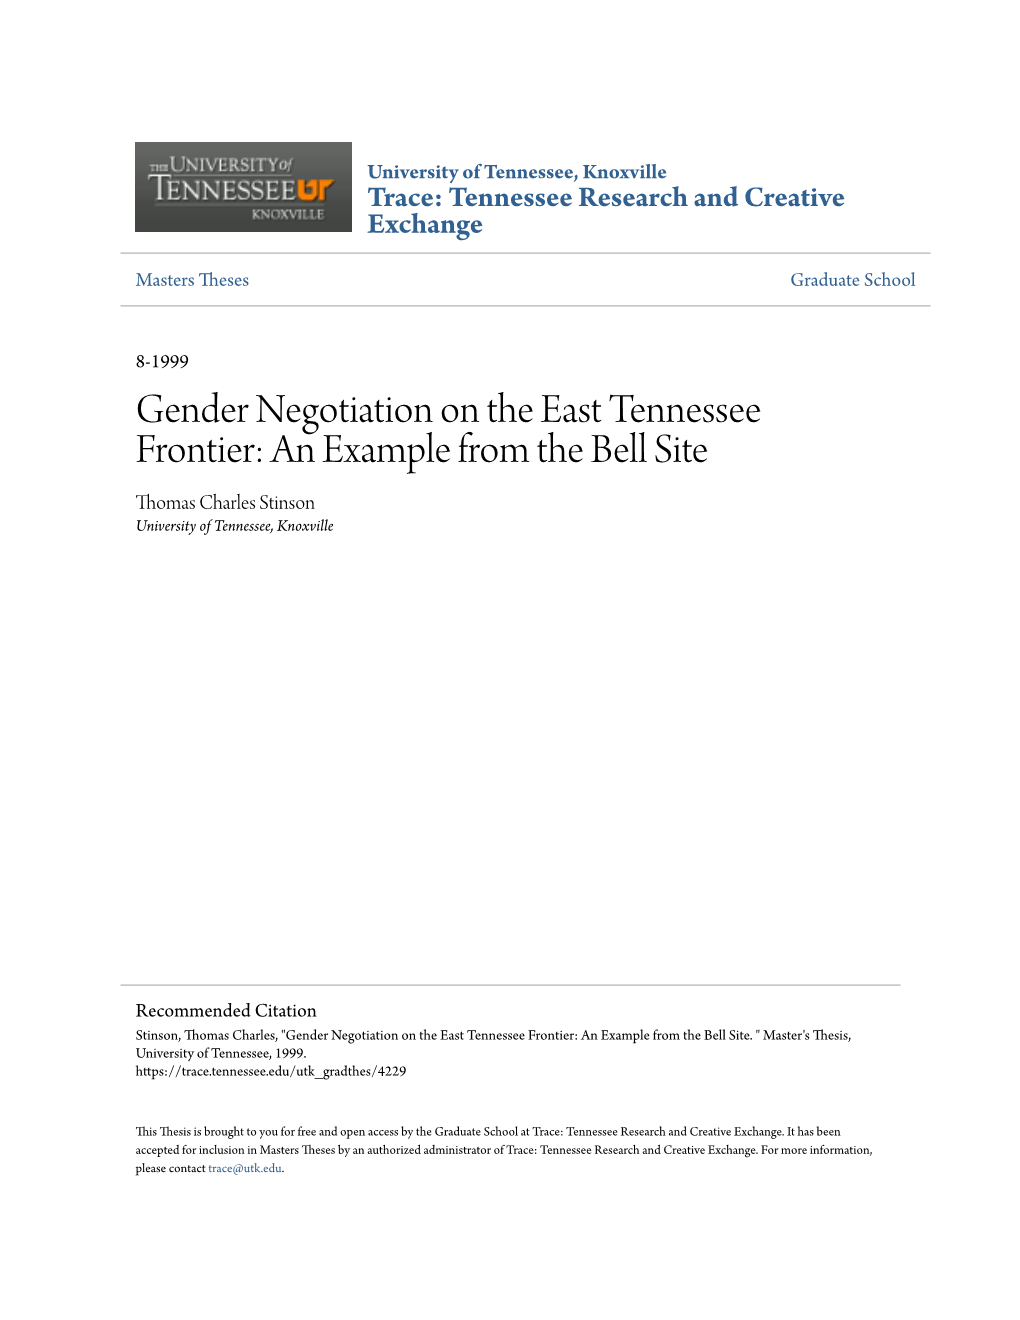 Gender Negotiation on the East Tennessee Frontier: an Example from the Bell Site Thomas Charles Stinson University of Tennessee, Knoxville